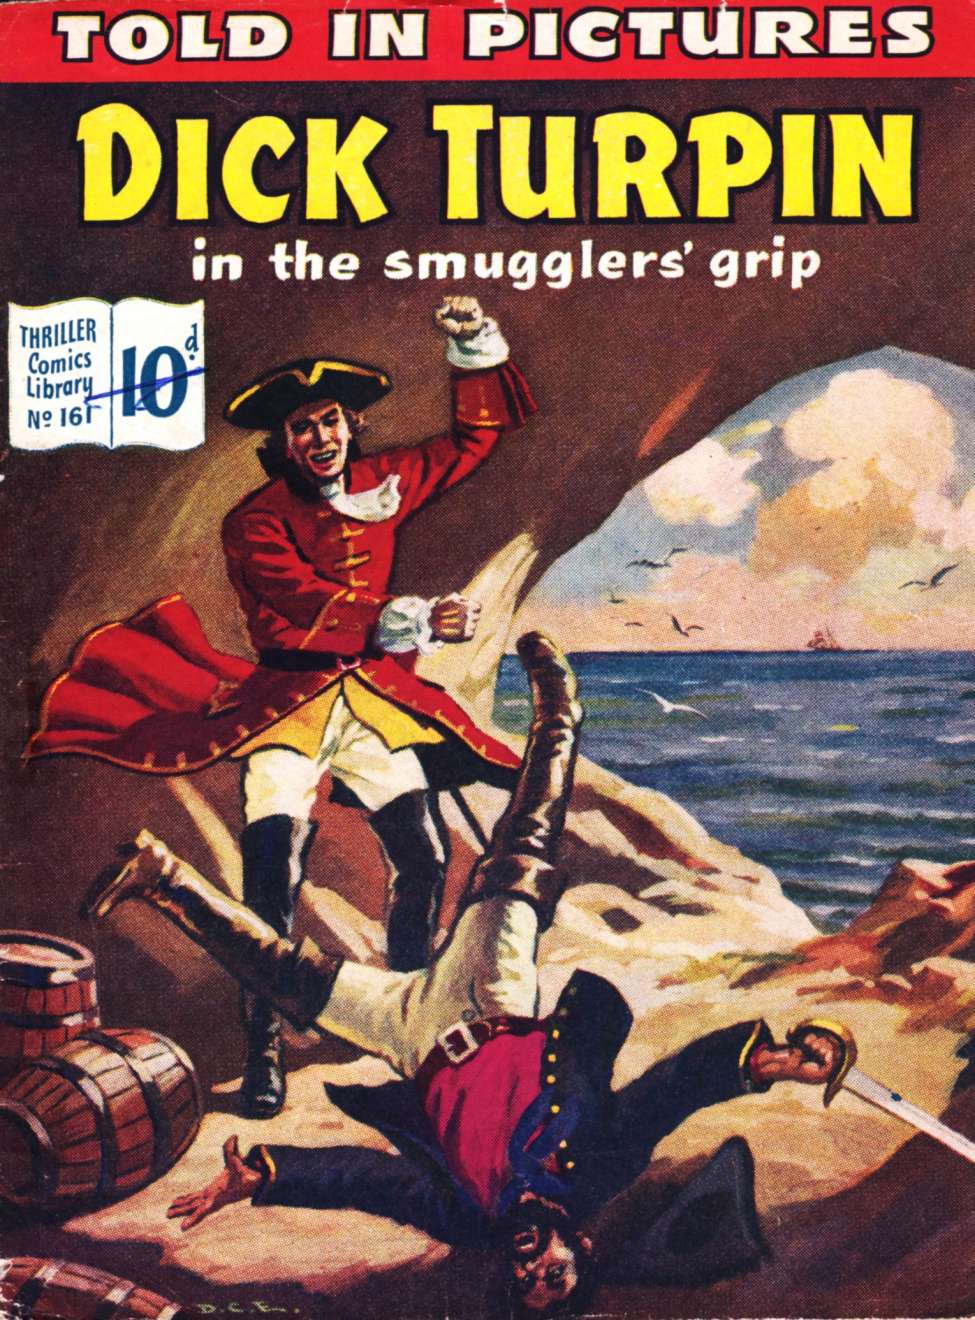 Book Cover For Thriller Comics Library 161 - The Smuggler's Grip